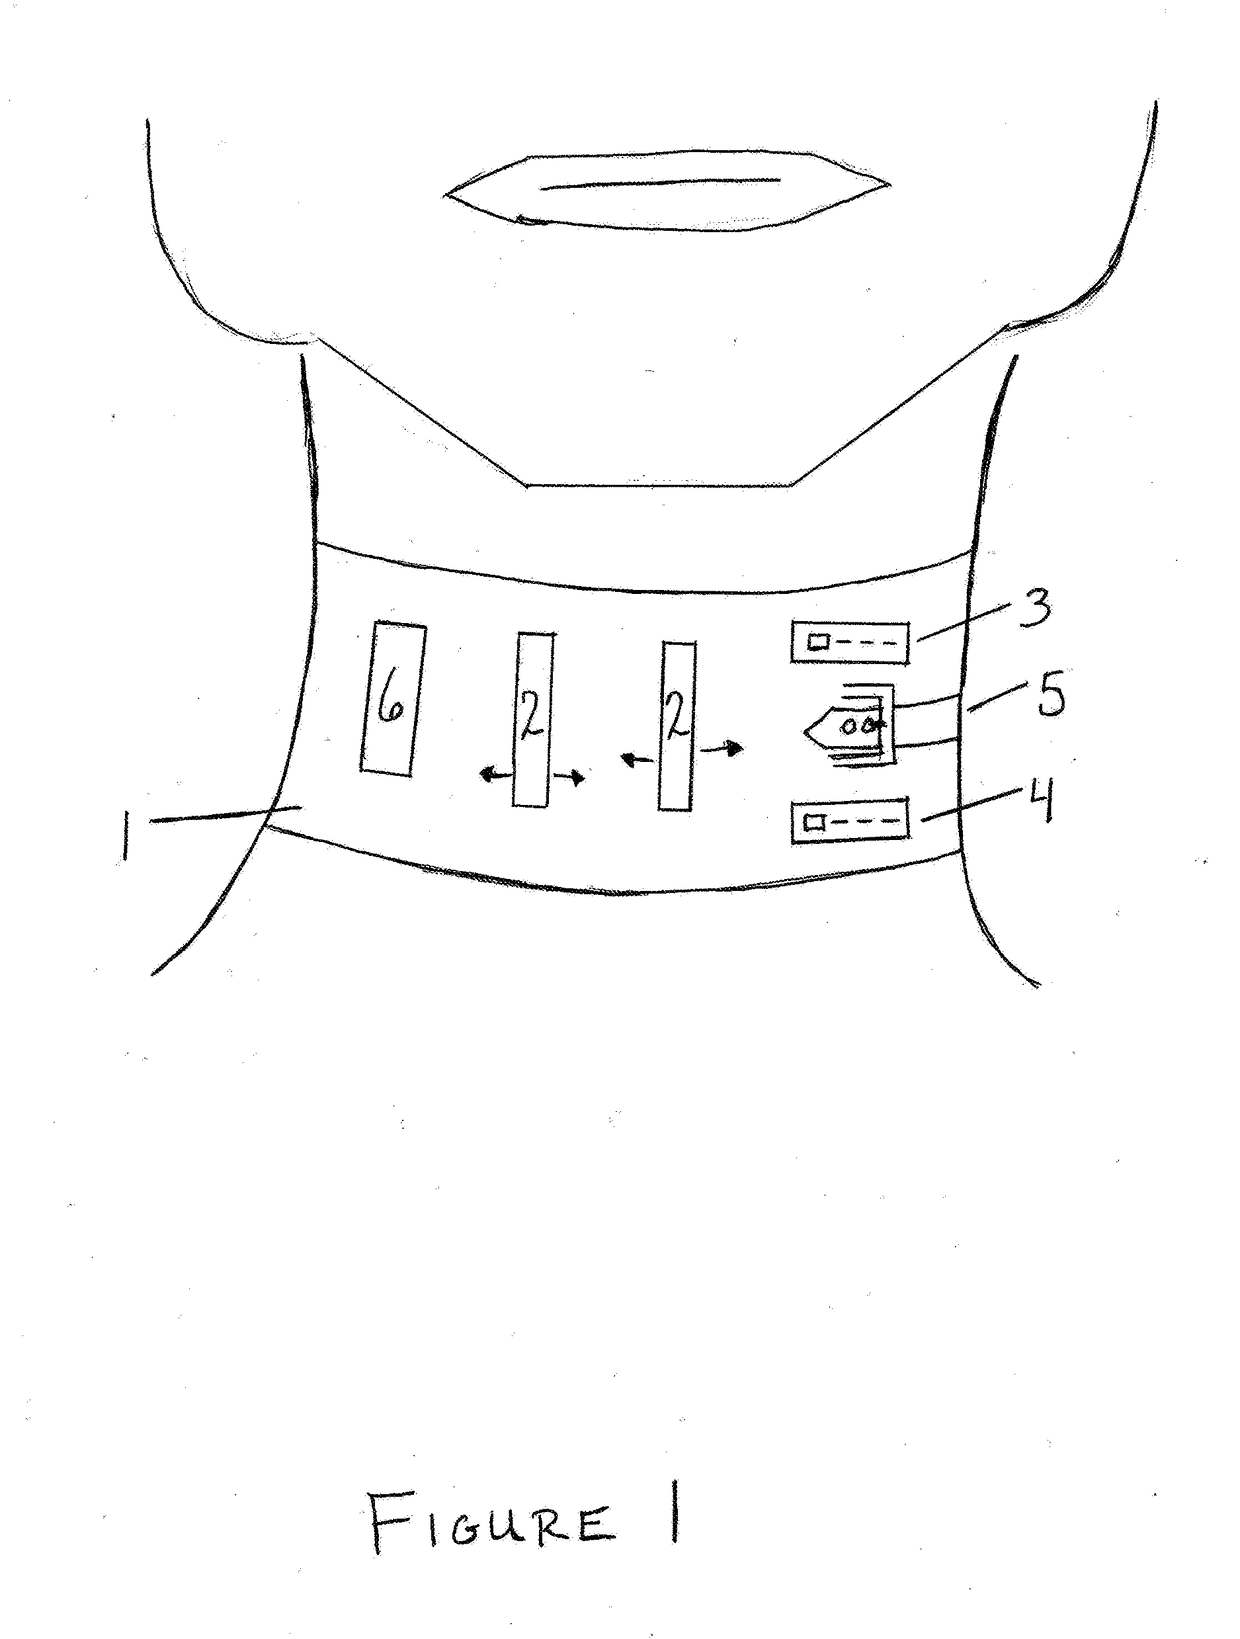 Device and method to alleviate obstructive sleep apnea and/or snoring and/or insomnia